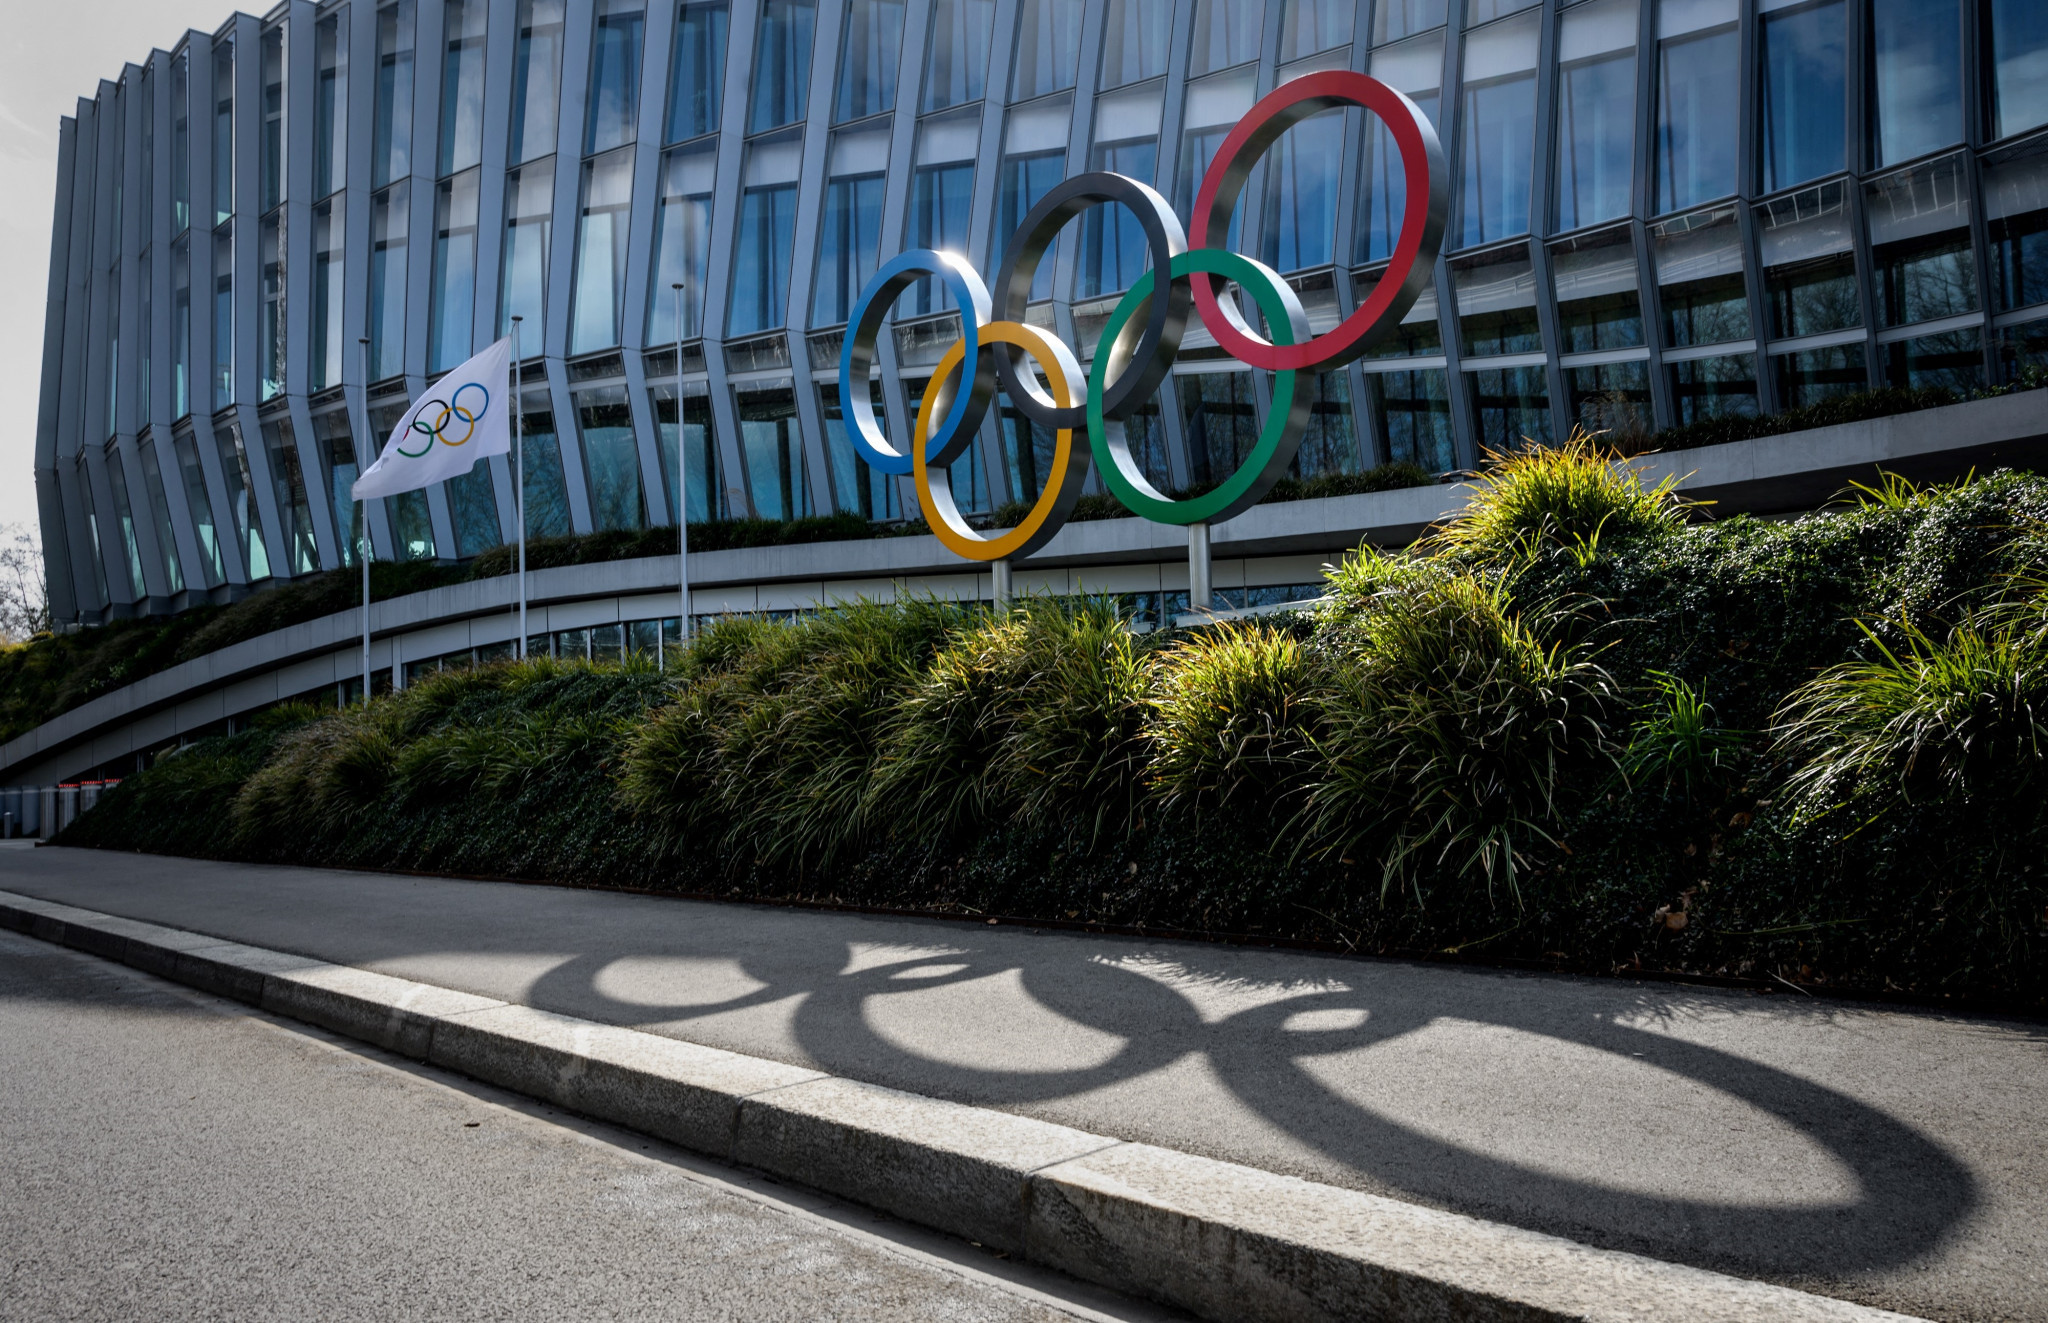 IOC warns of "consequences" if IBA goes ahead with legal action